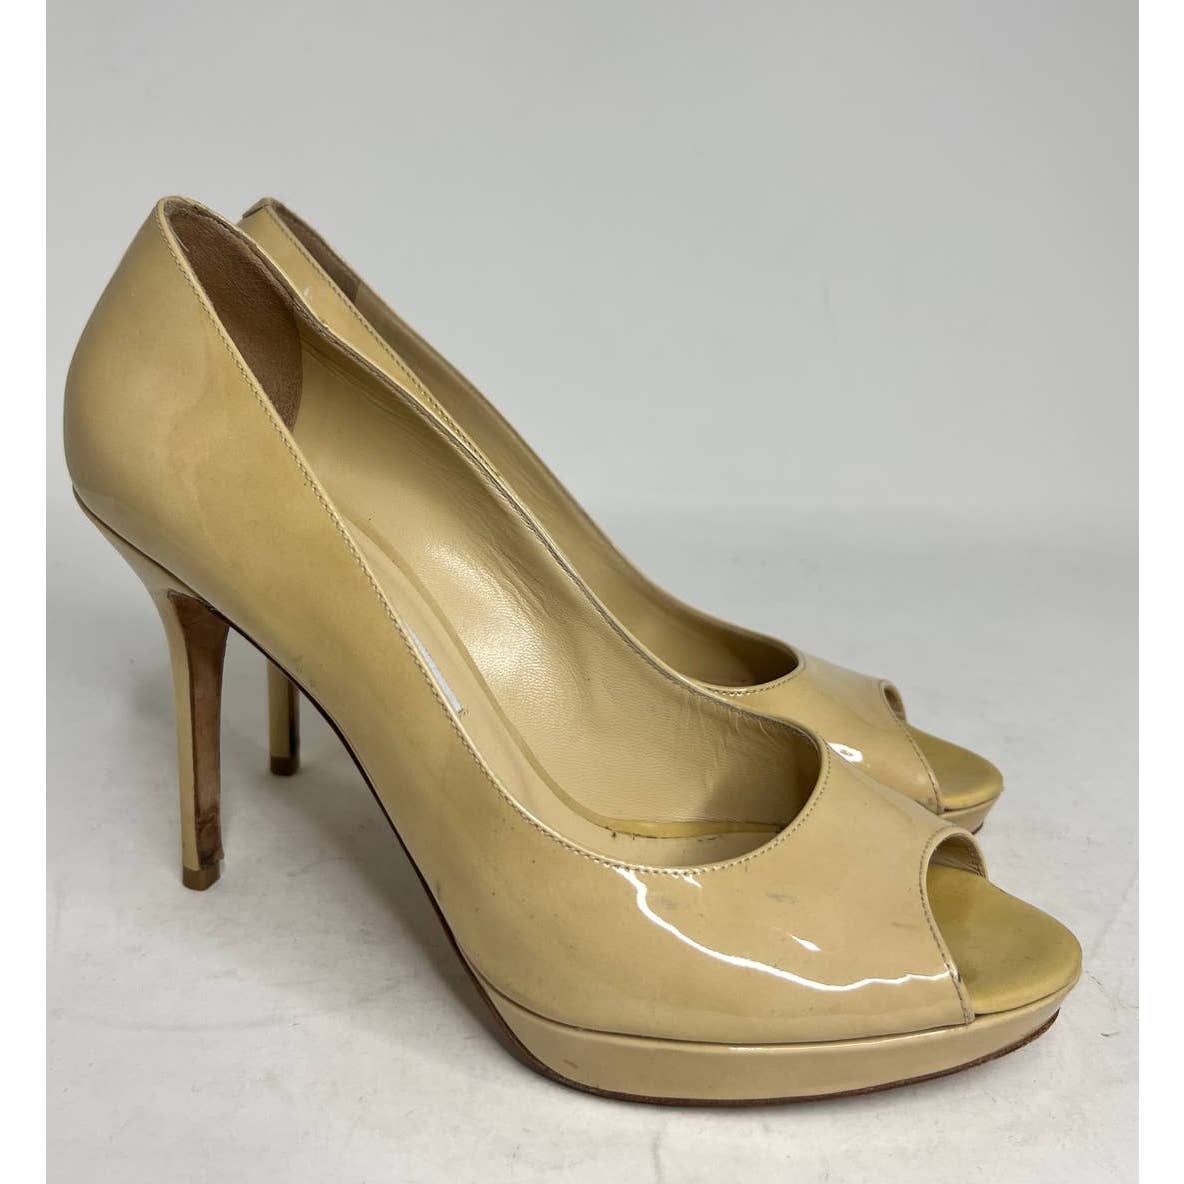 Jimmy Choo Nude Patent Leather Pumps Sz. 9.5(39.5)